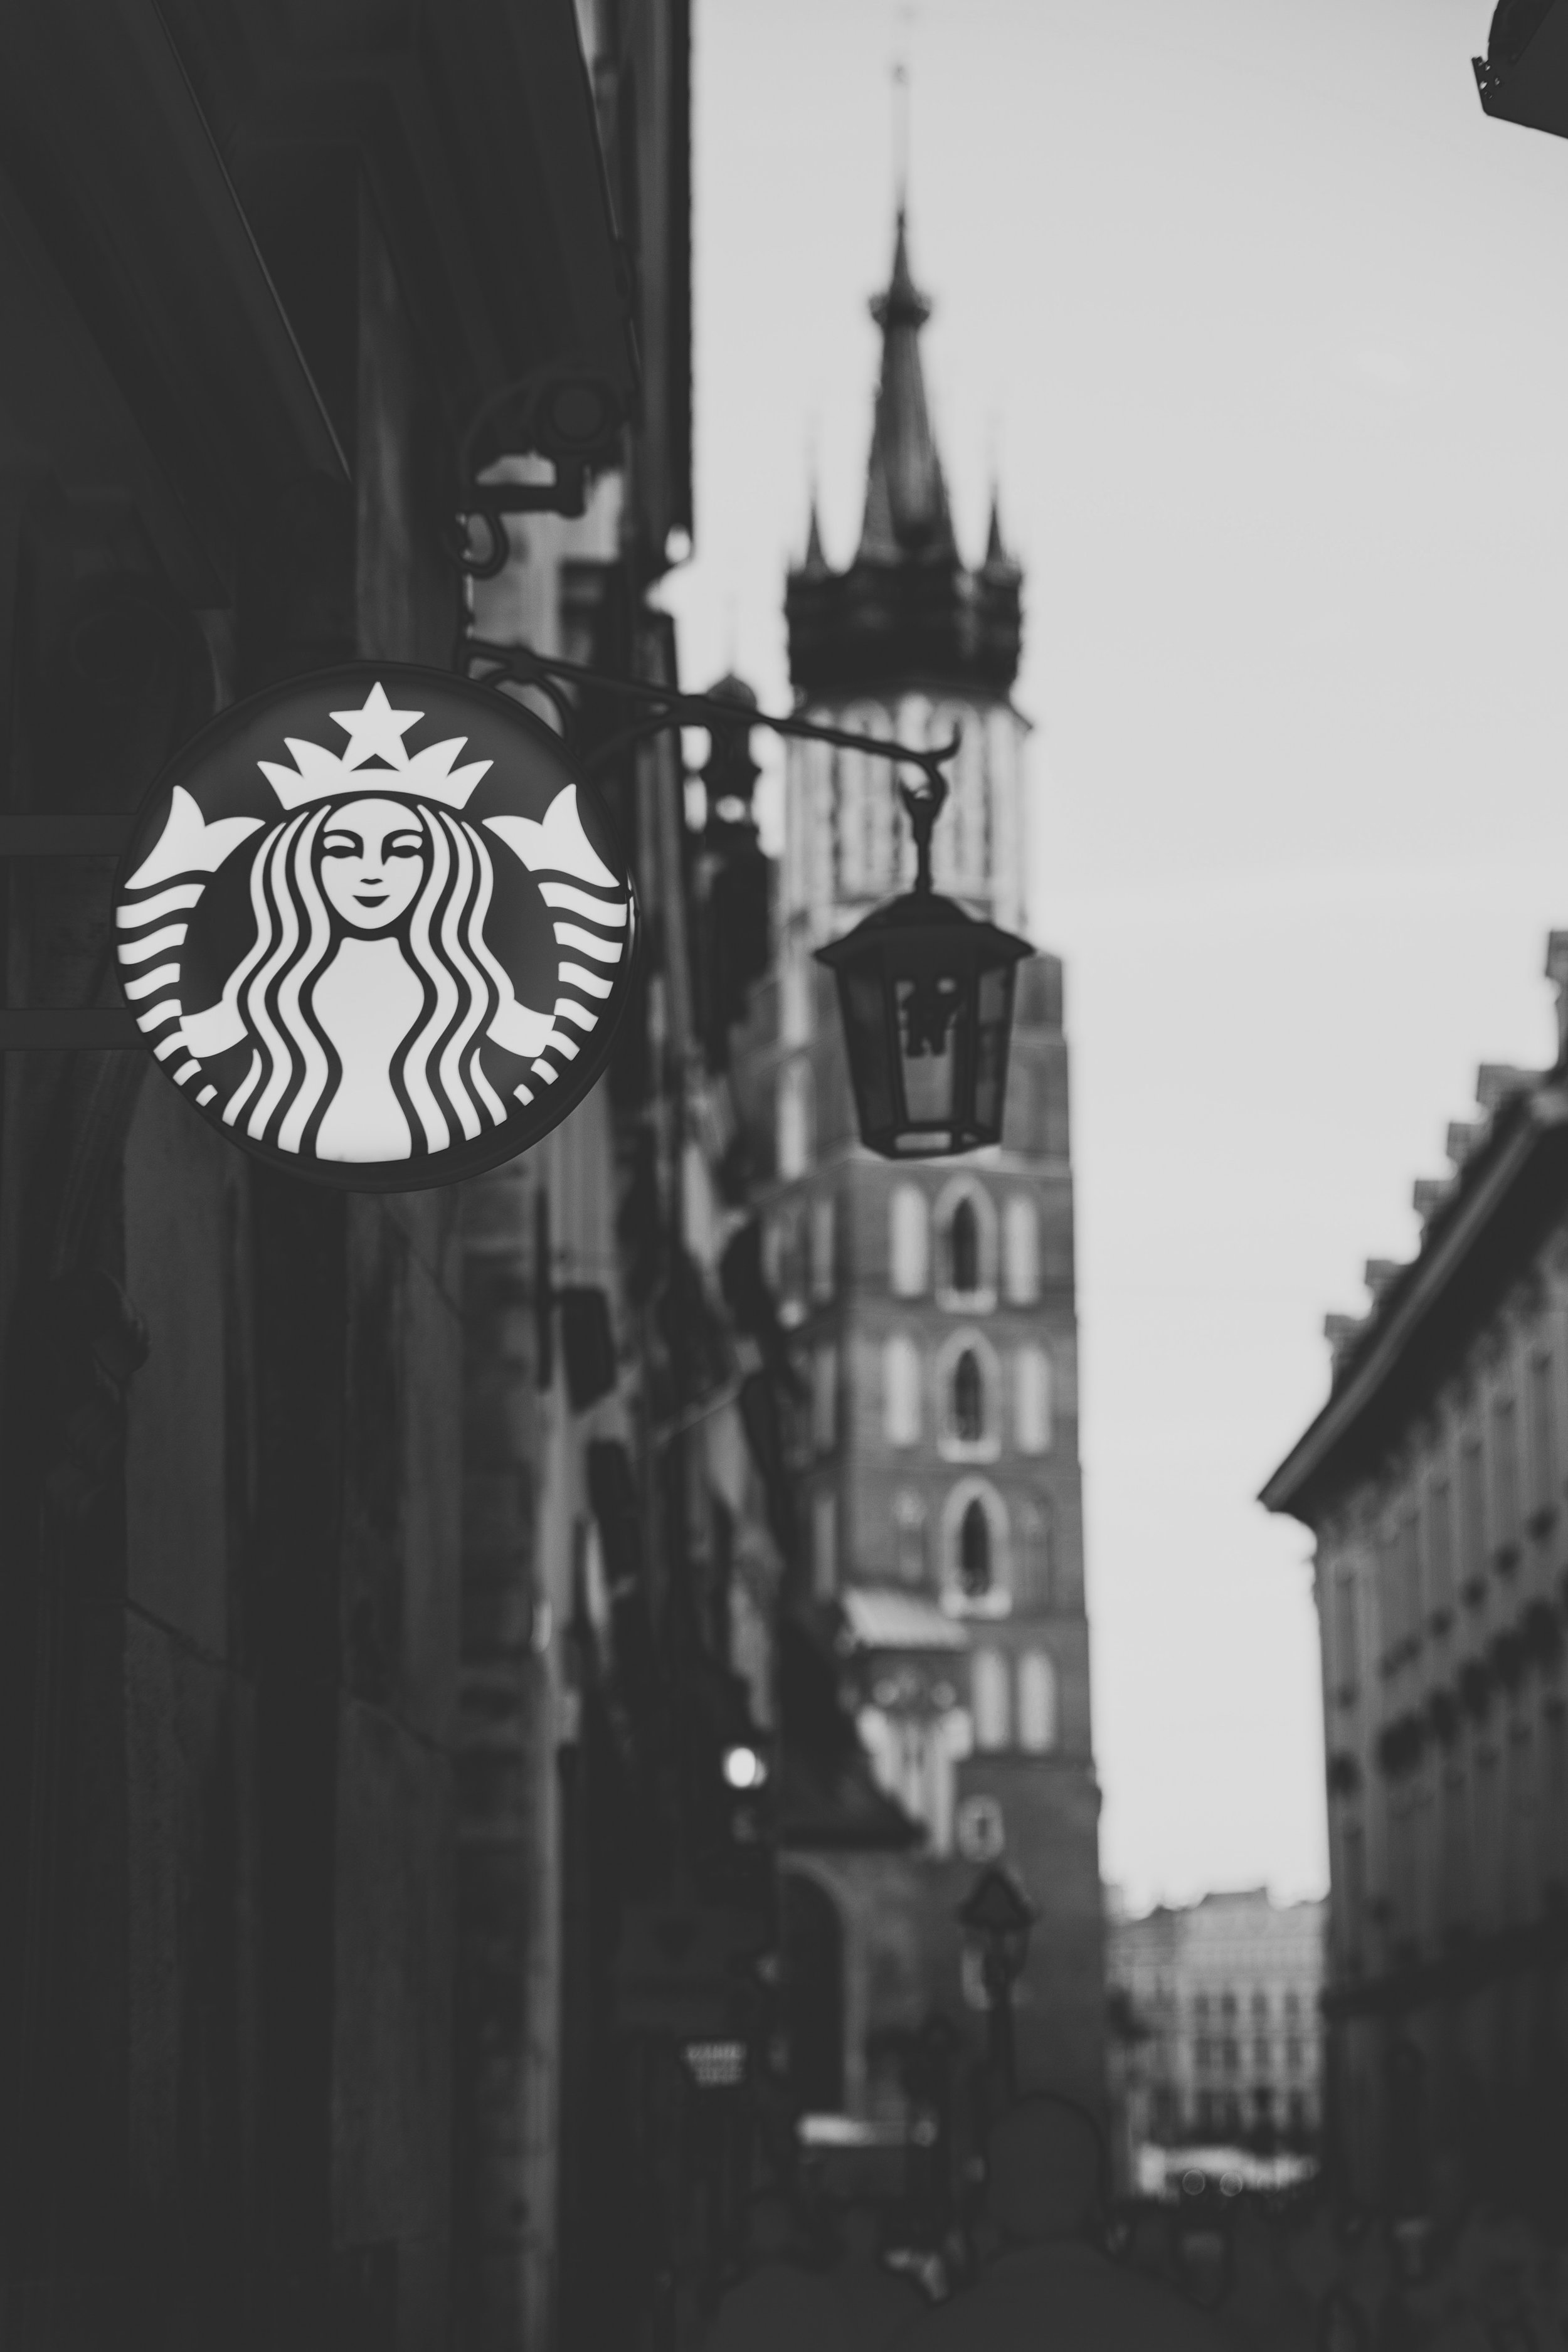 A Starbucks sign in the foreground, with city streets behind